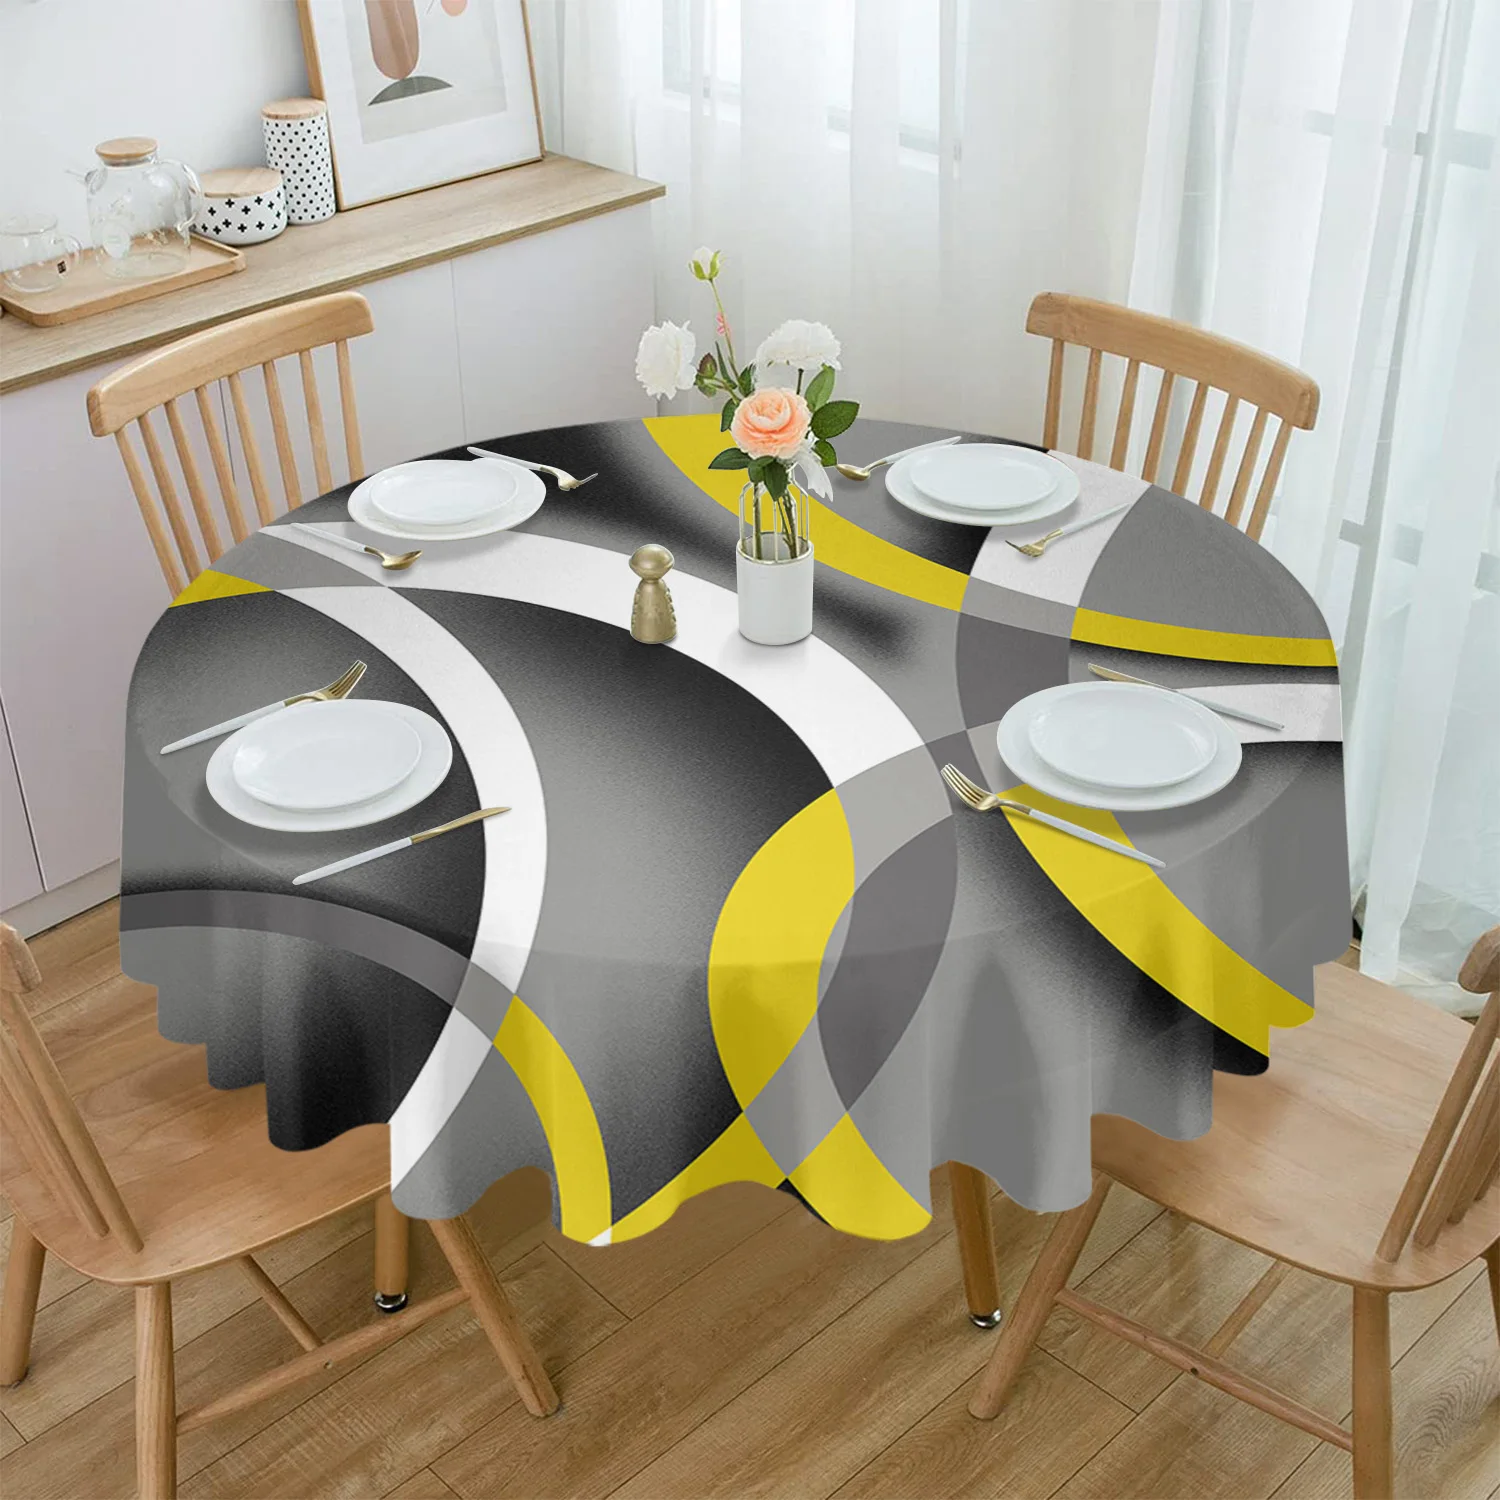 

Abstract Modern Art Geometry Yellow Round Tablecloth Waterproof Table Cover for Wedding Party Decoration Dining Table Cover